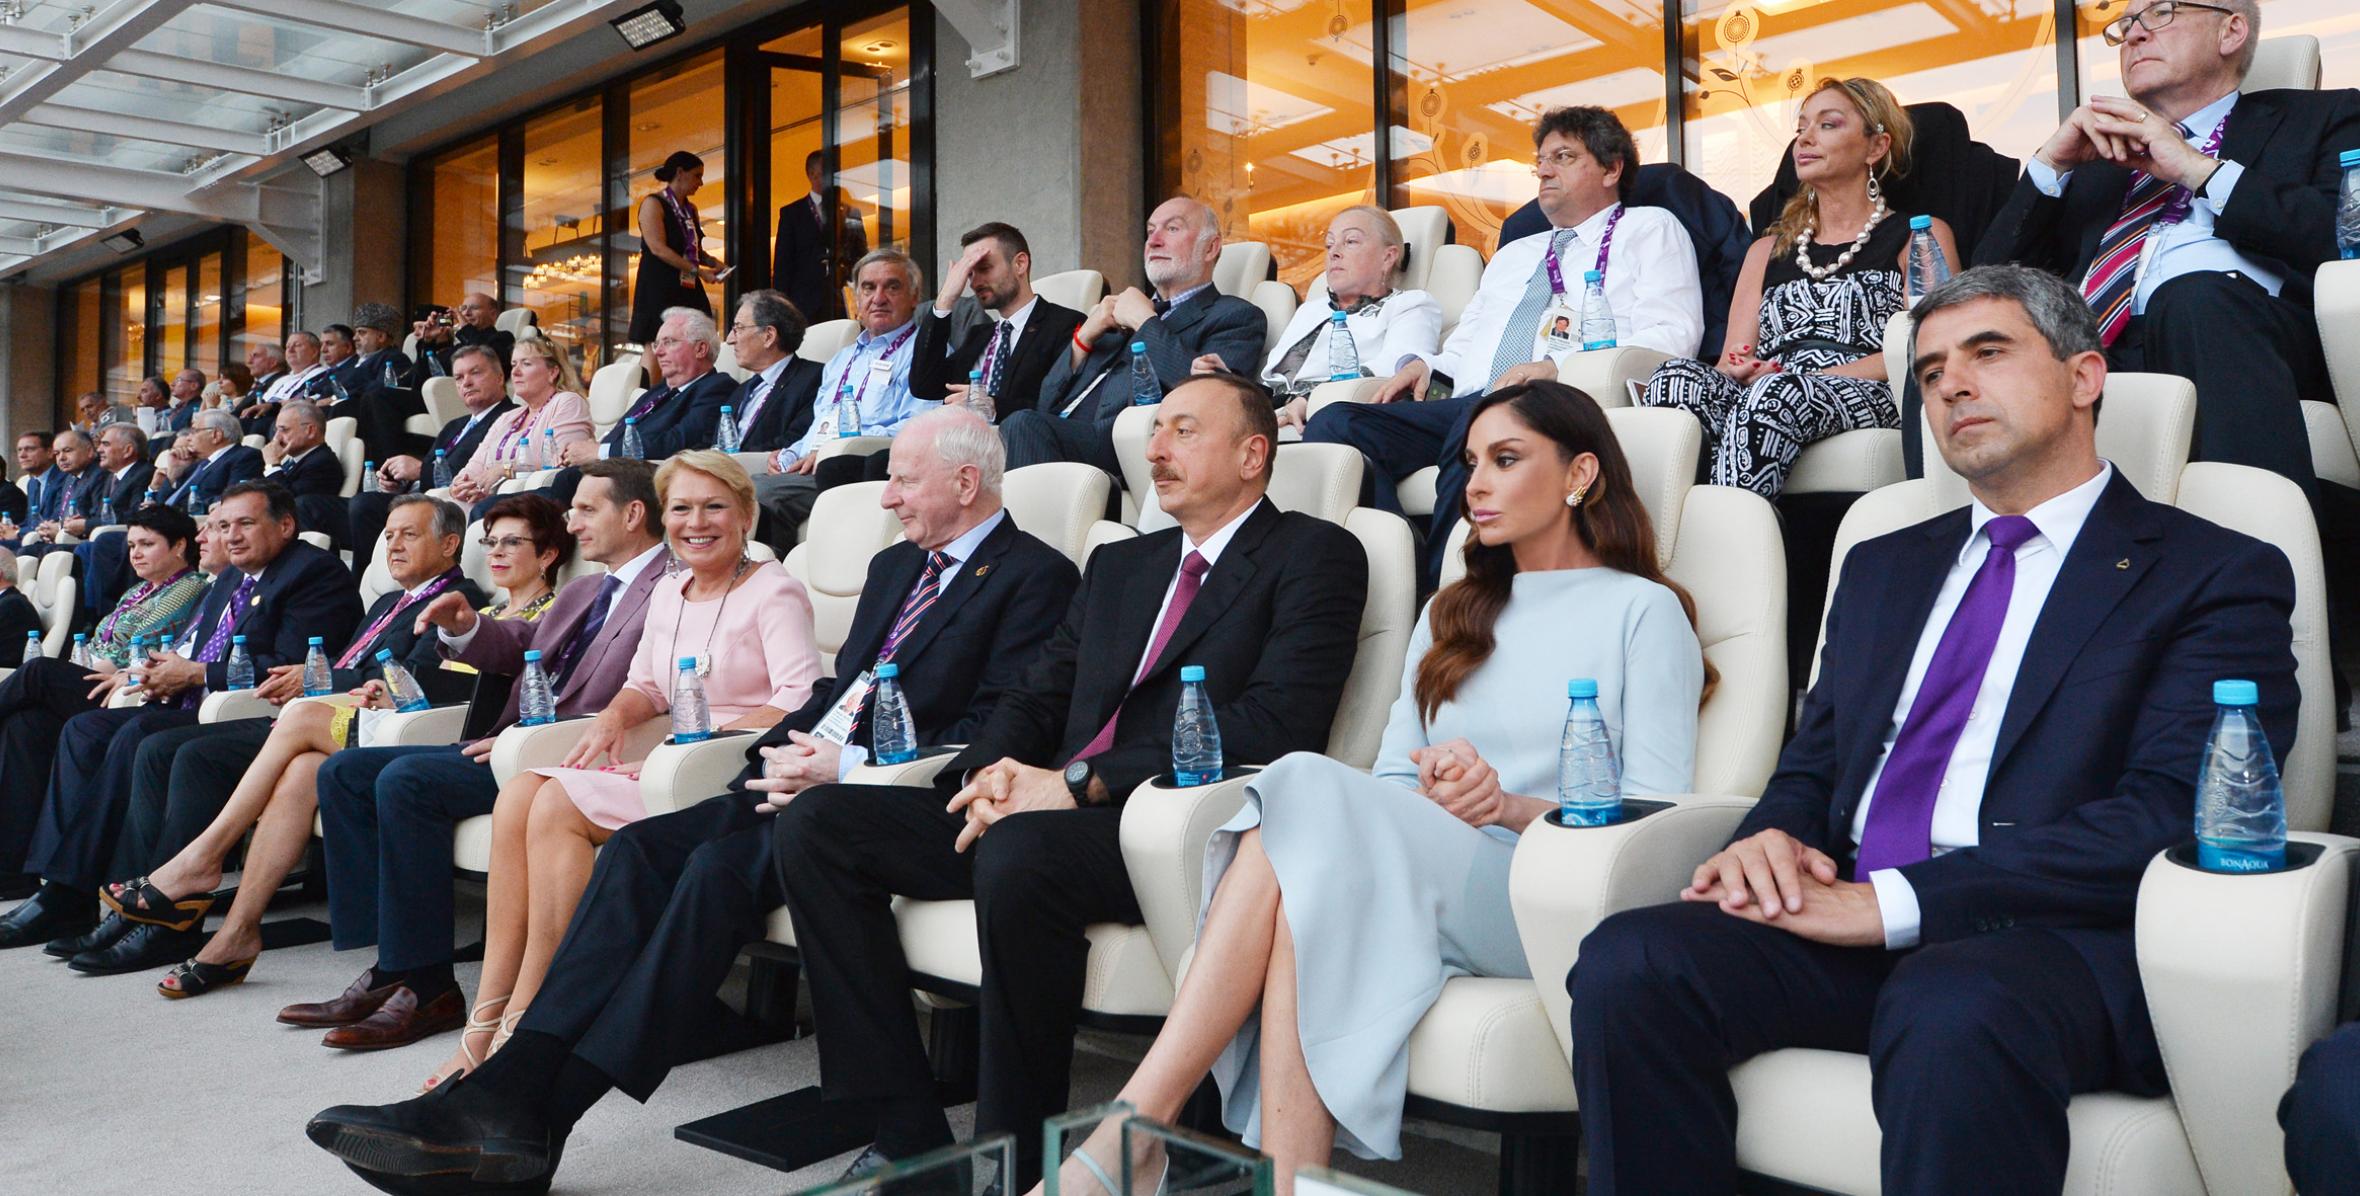 Ilham Aliyev attended the "Baku - 2015" First European Games Closing Ceremony